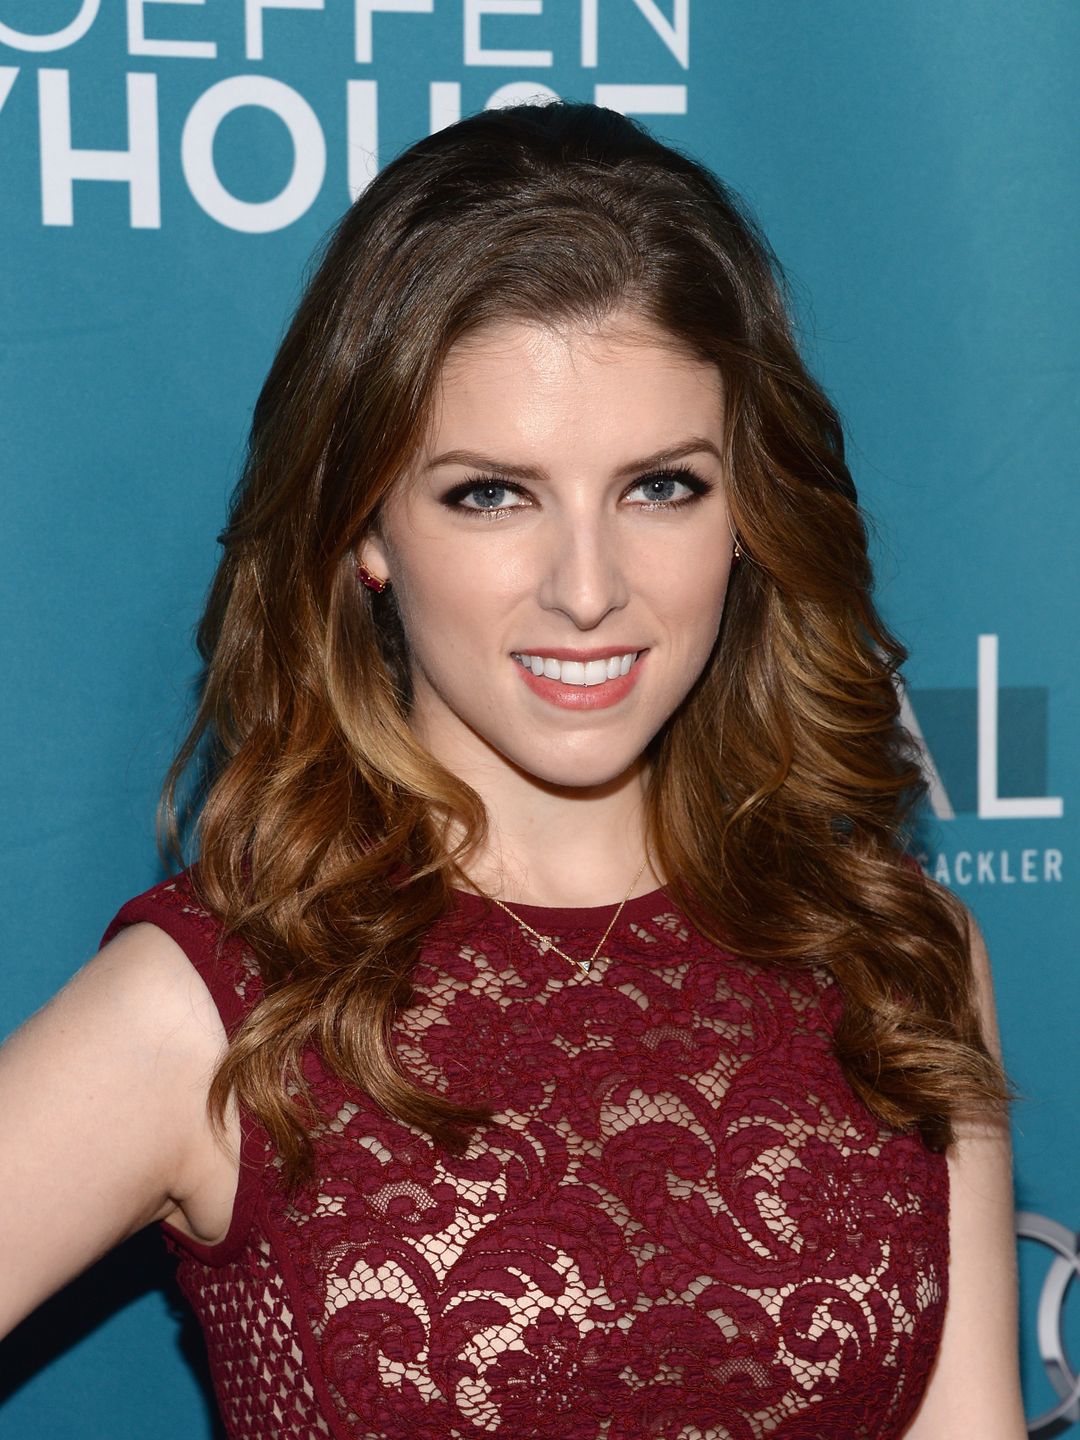 Anna Kendrick who is her father